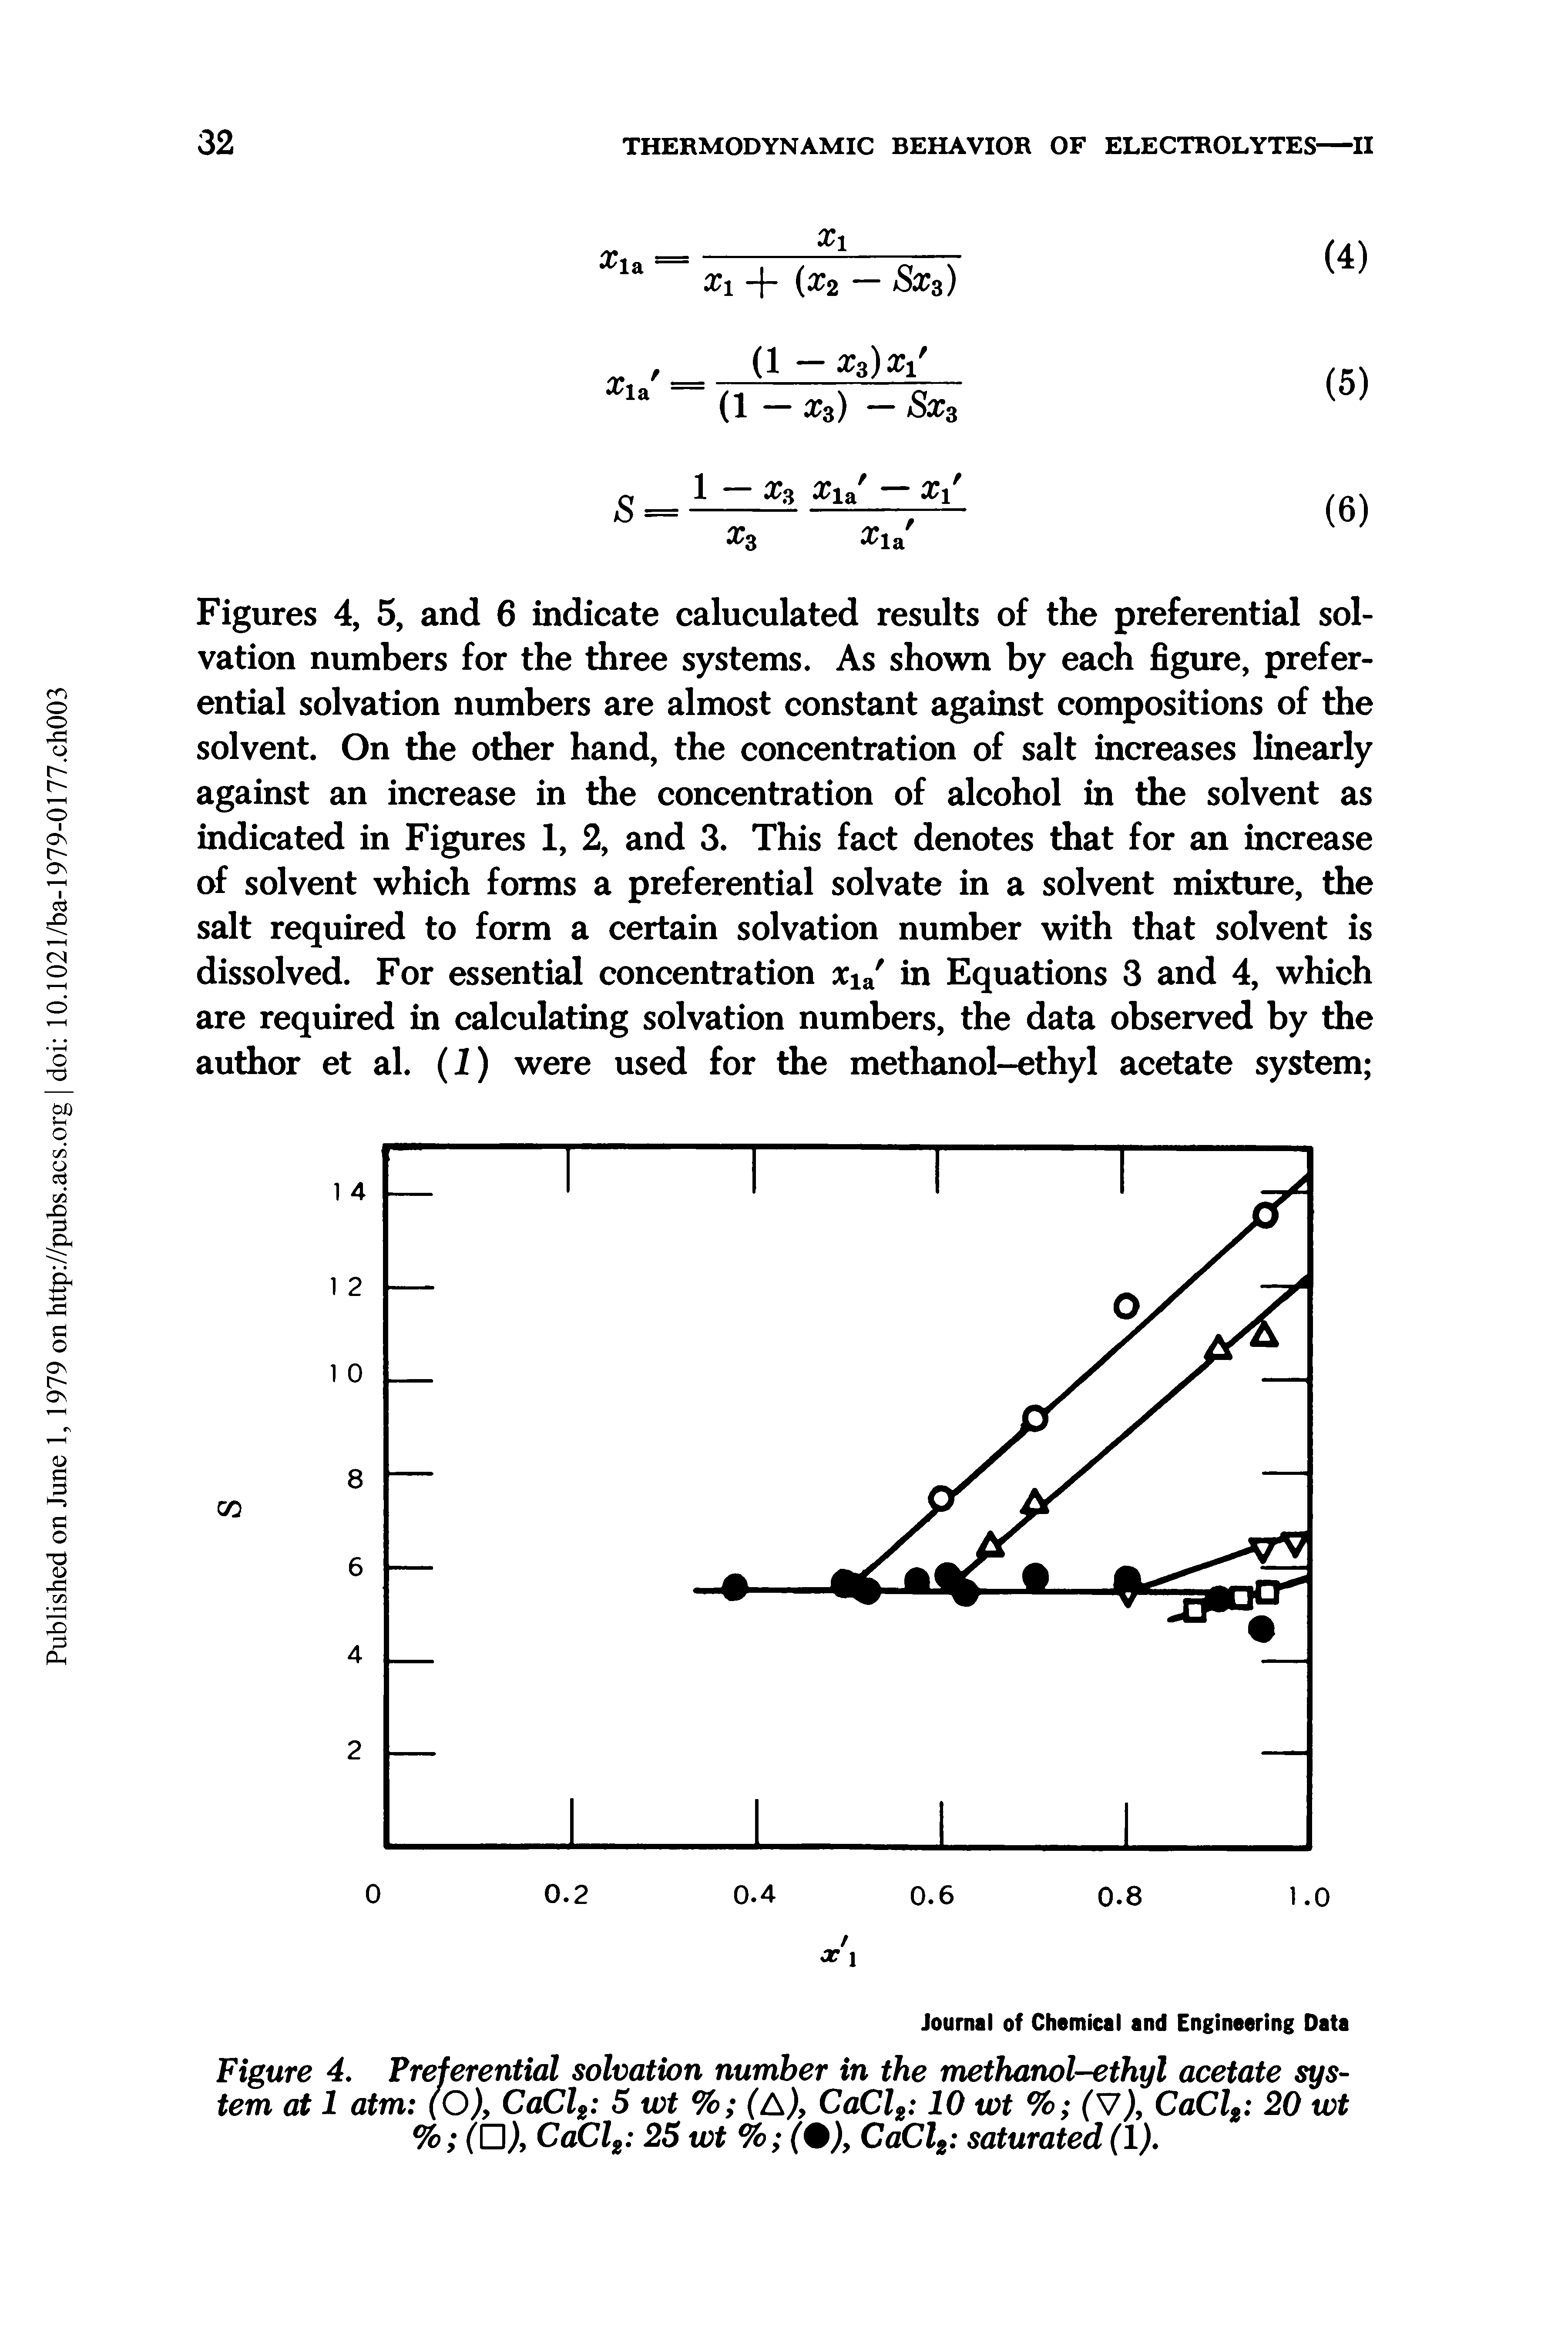 Figure 4. Preferential solvation number in the methanol-ethyl acetate system at 1 atm (O), CaCl2 5 wt % (A), CaCl2 10 wt % (V), CaCl2 20 wt % (D)y CaCl2 25 wt % (%), CaCl2 saturated (1).